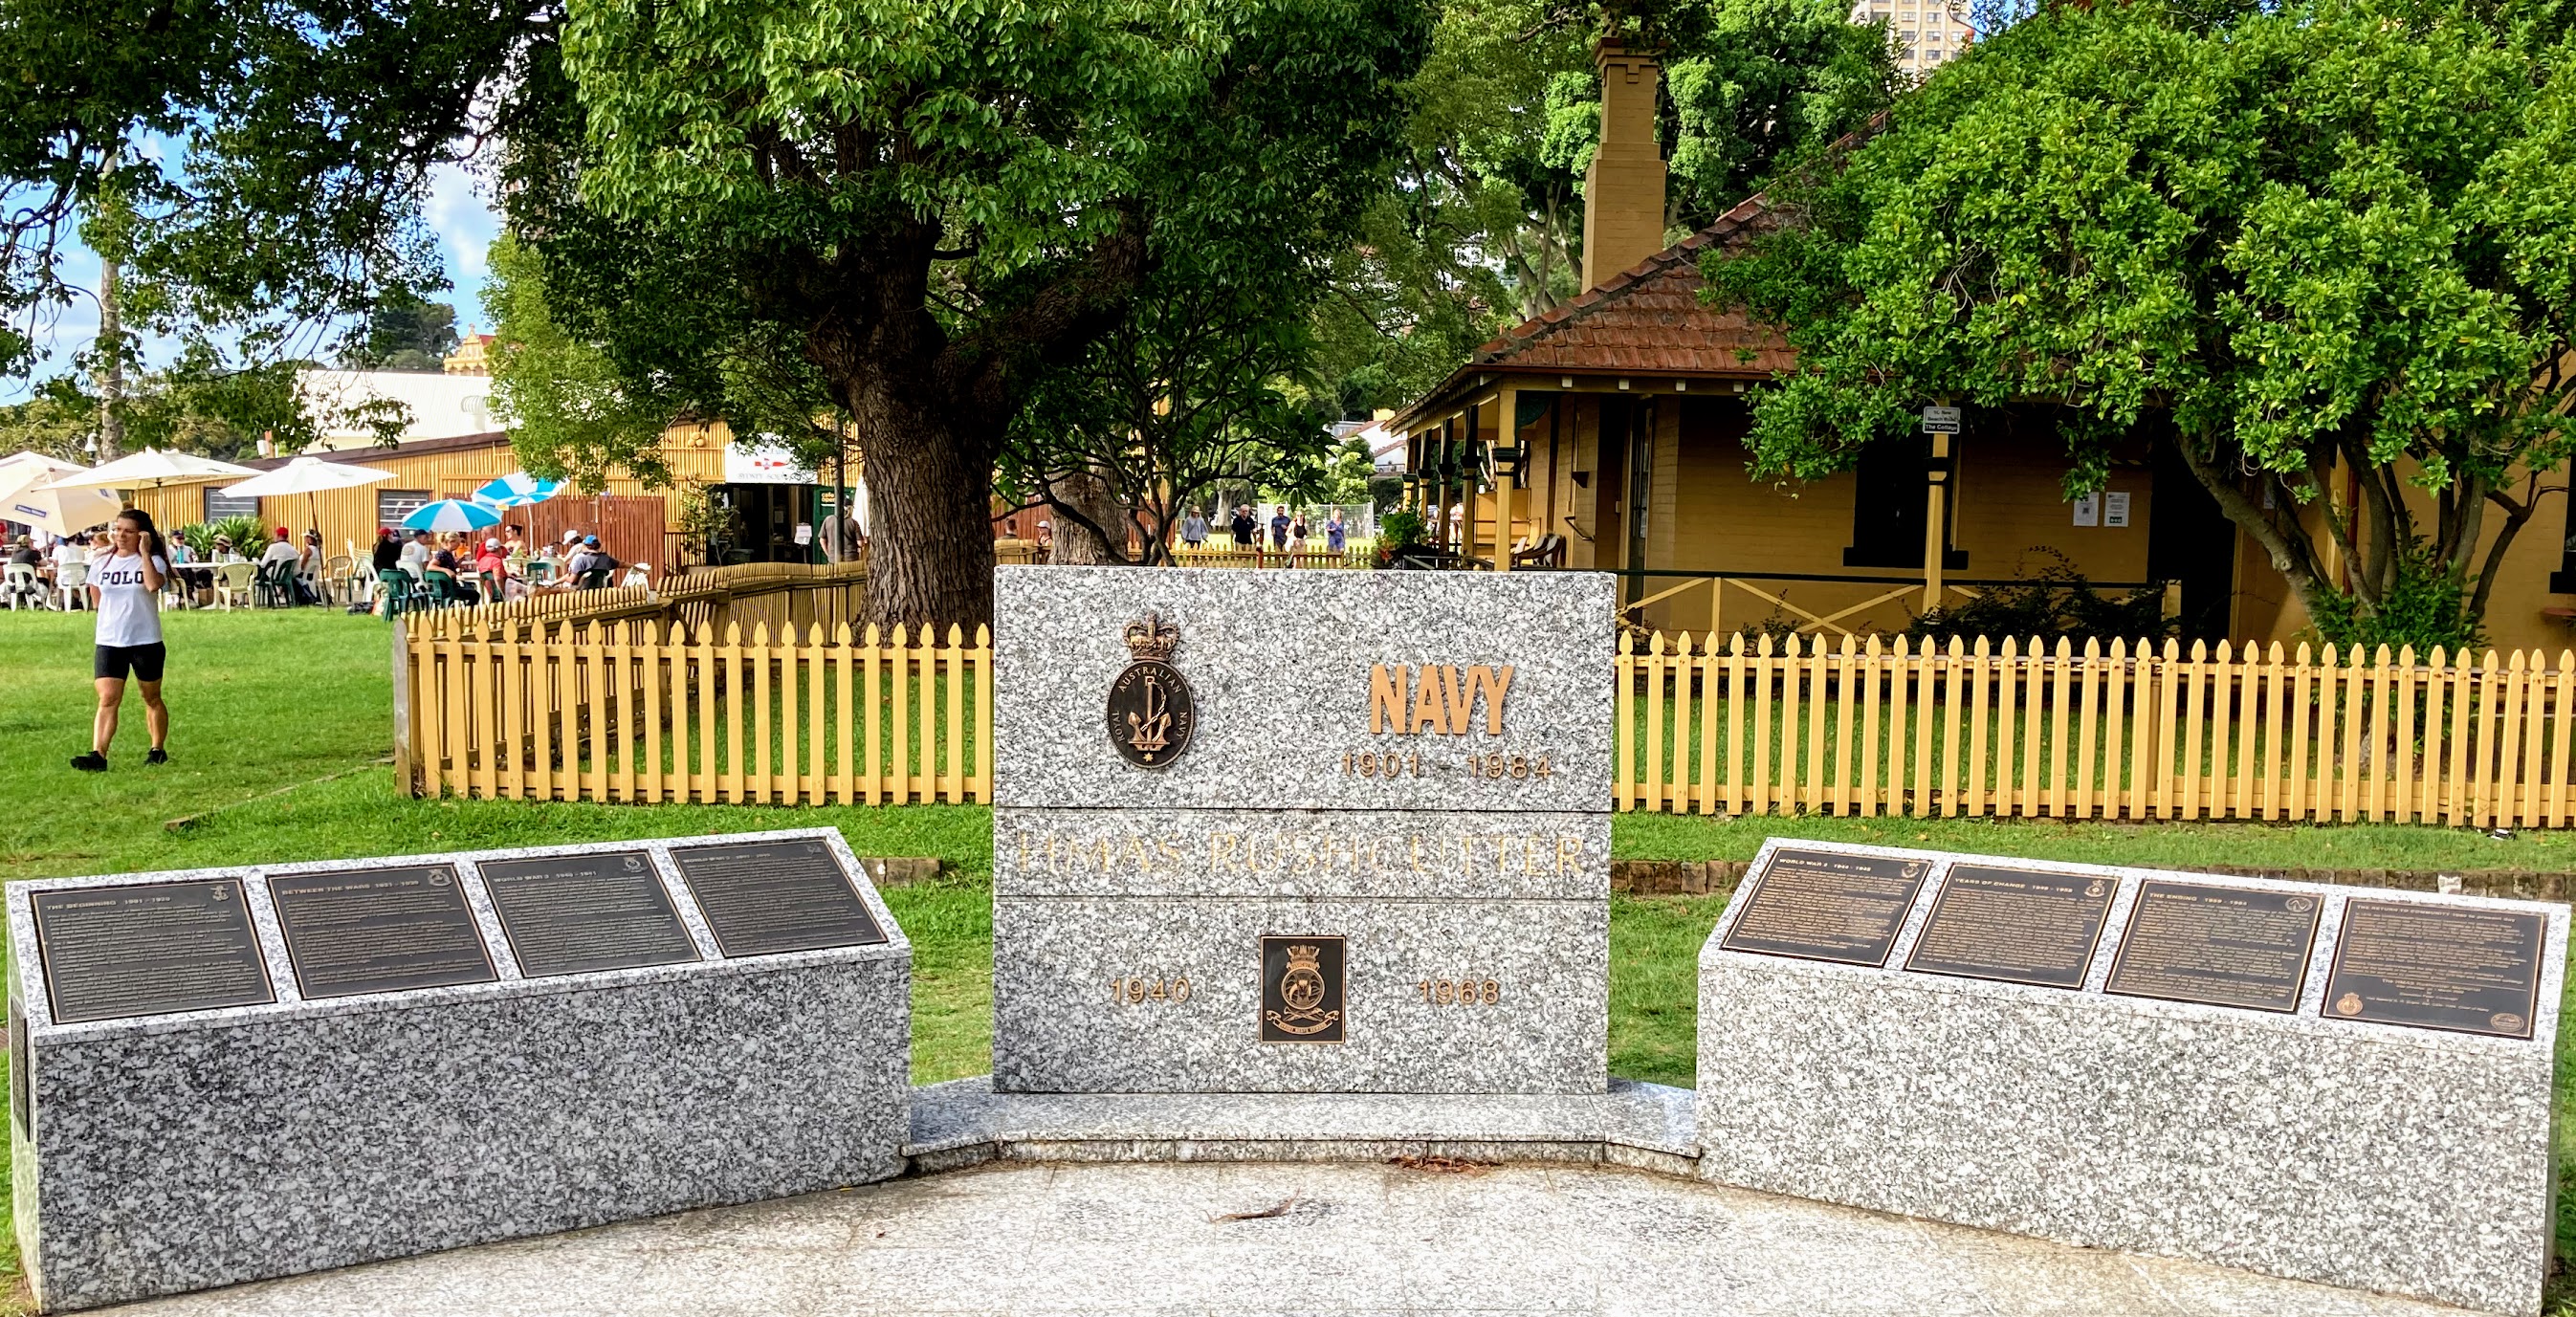 The Birthplace of the NWOA - HMAS RUSHCUTTER